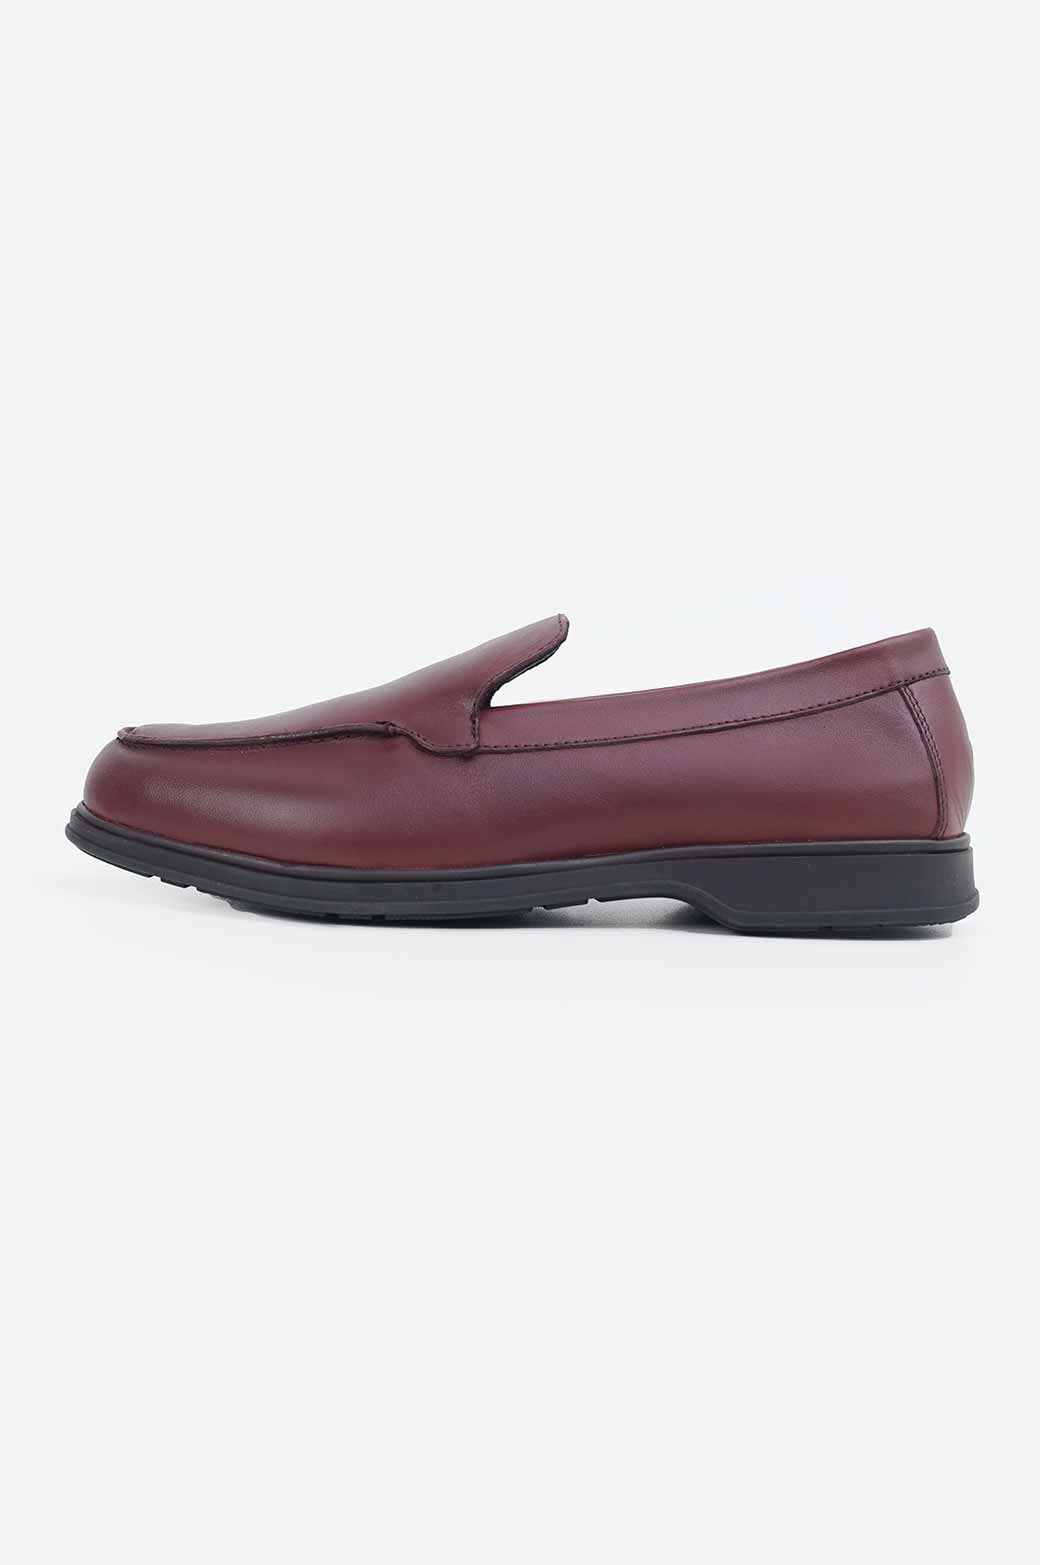 BURGENDY CASUAL SUMMER LOAFERS